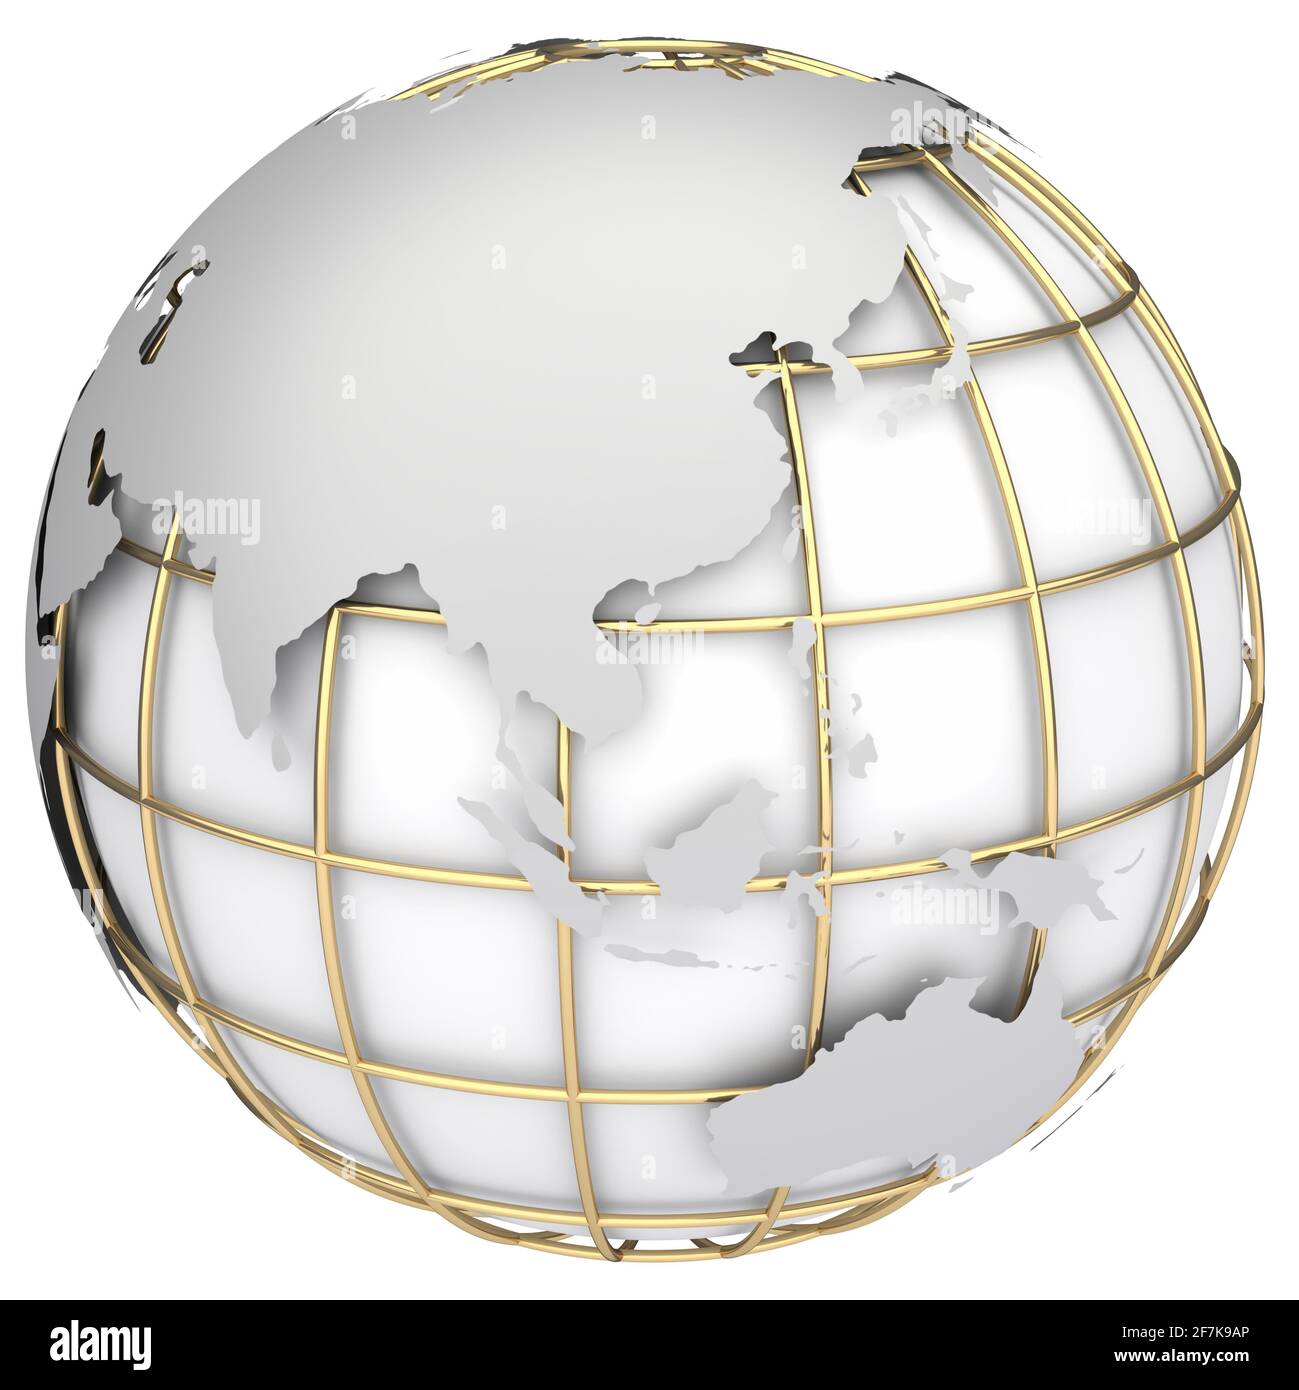 Earth world map.Australia and Asia on a planet globe Stock Photo